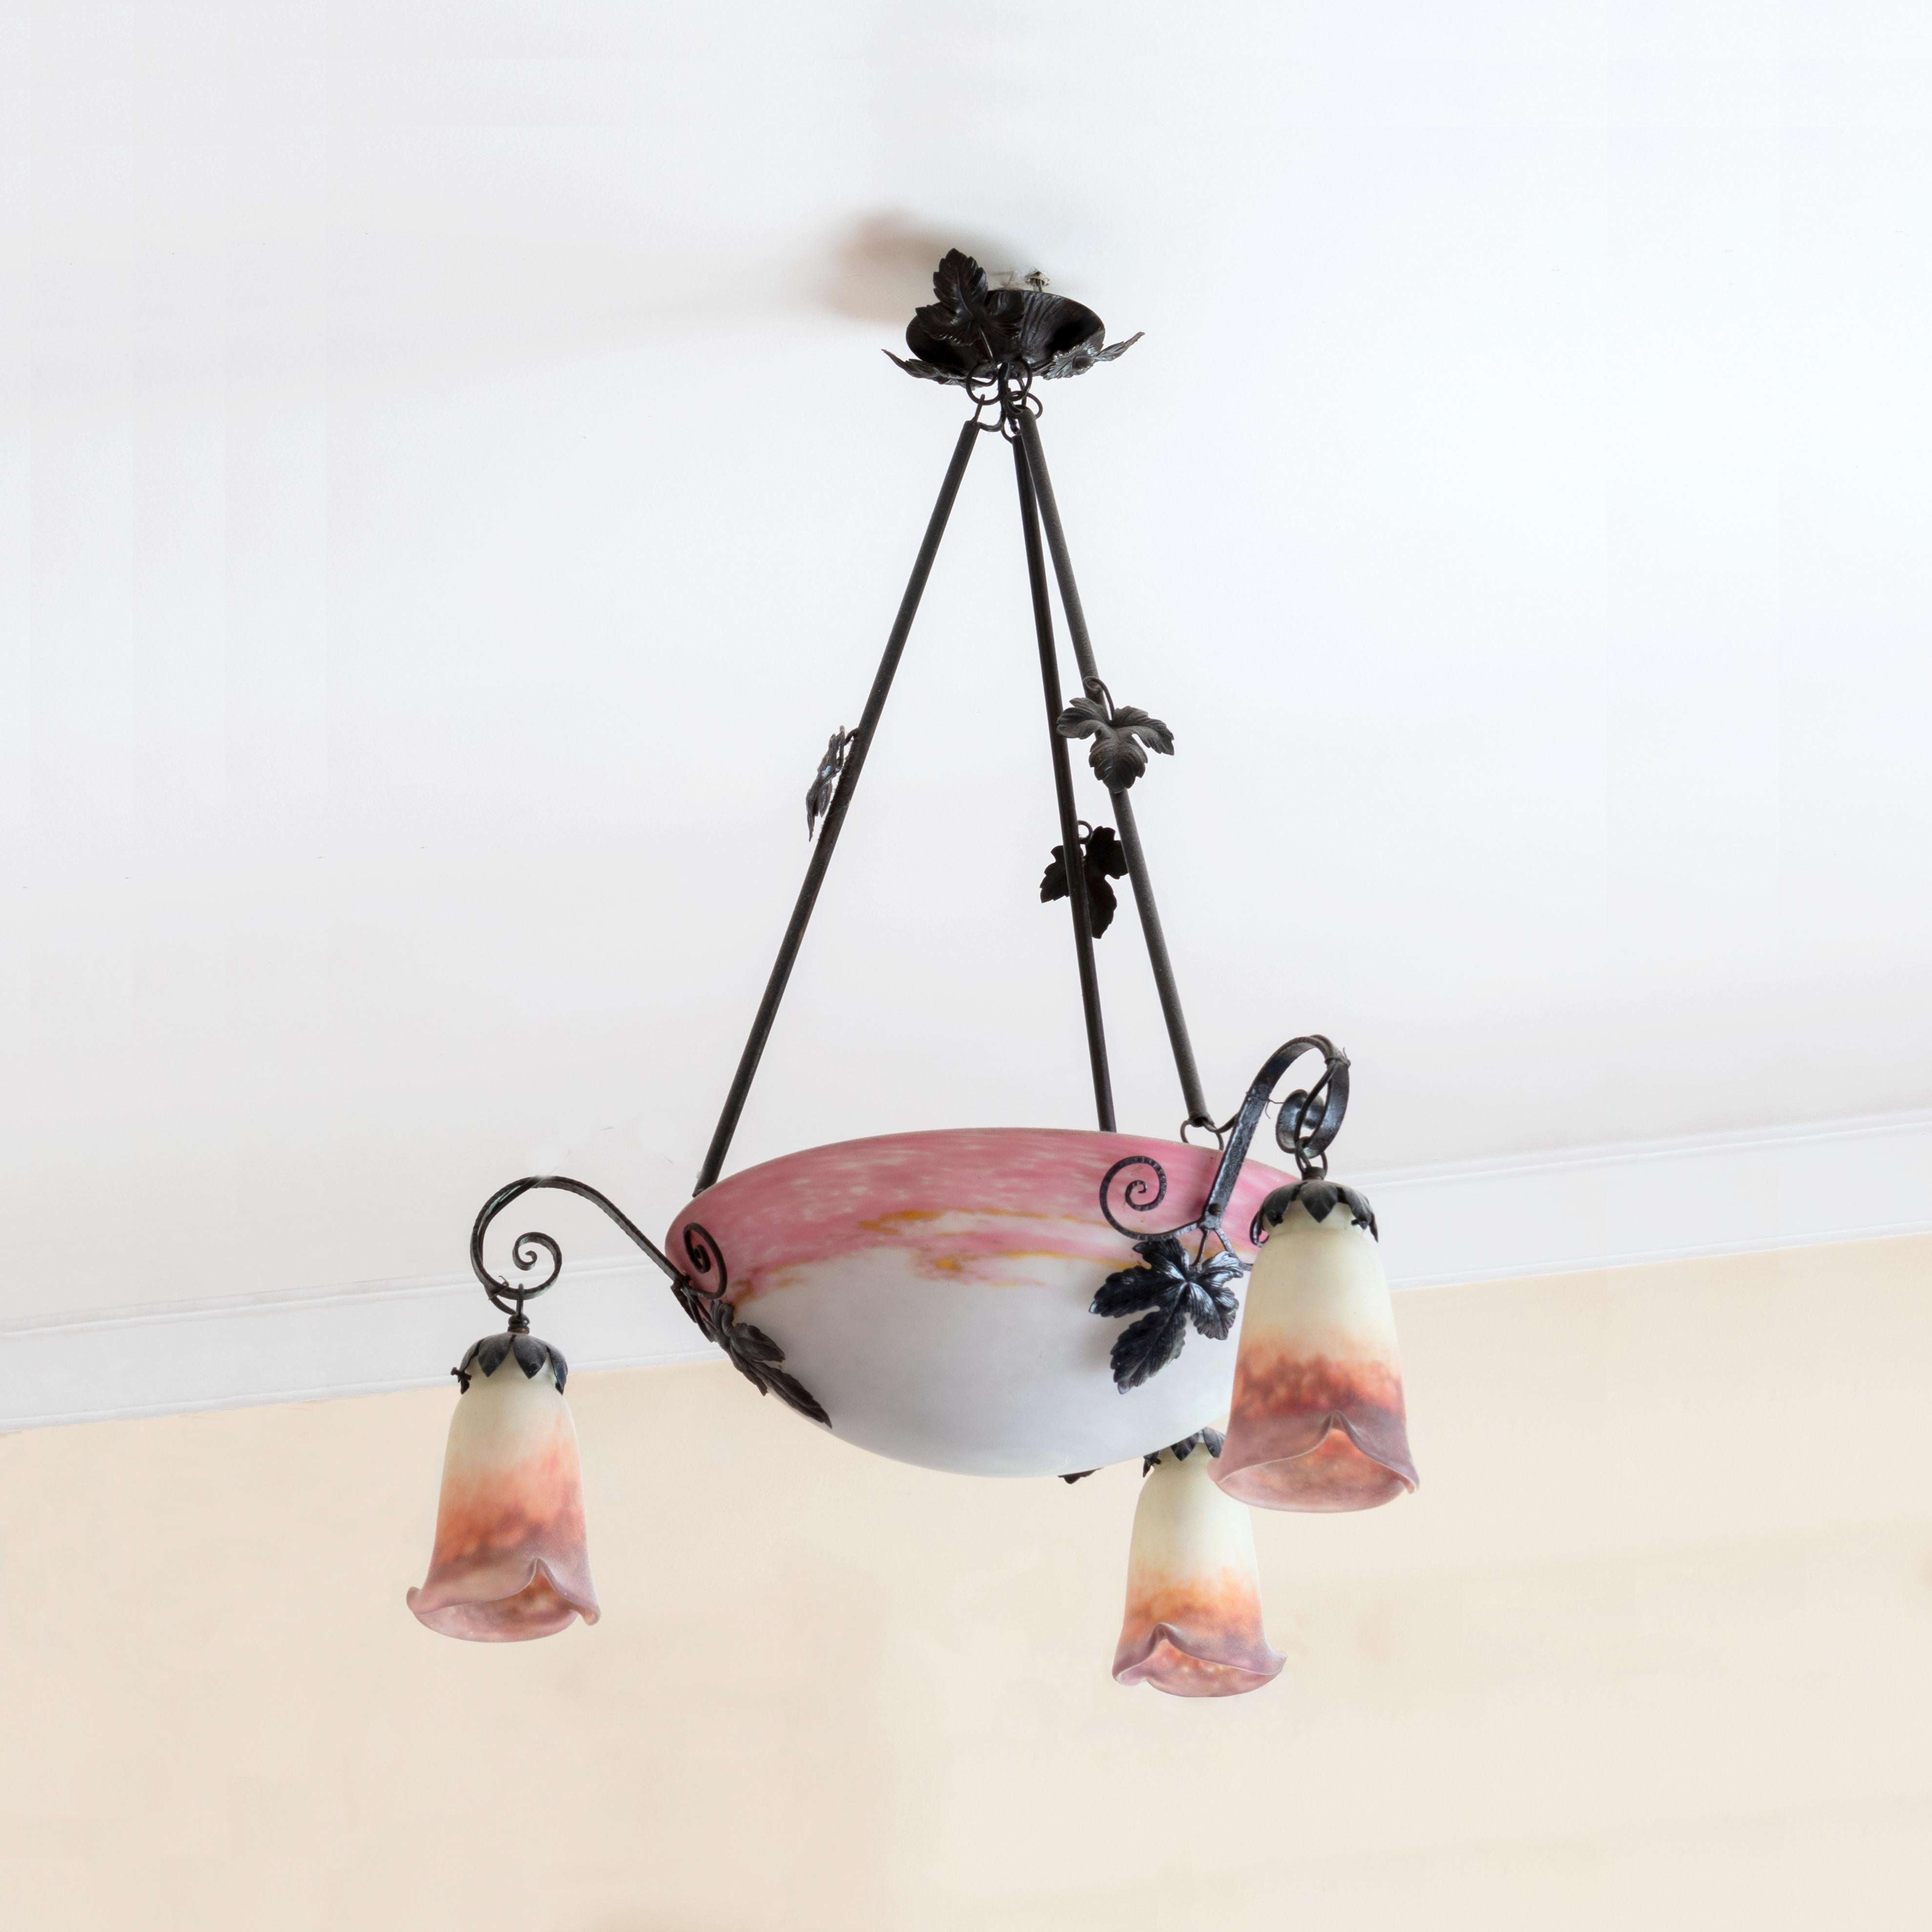 A central bowl shade with fitments that support the three satellite shades and rods for suspension,  ironwork rods decorated with rose motifs.

The chandelier is currently wired for both European Union and US standards LED lights. The LED lamp bulbs